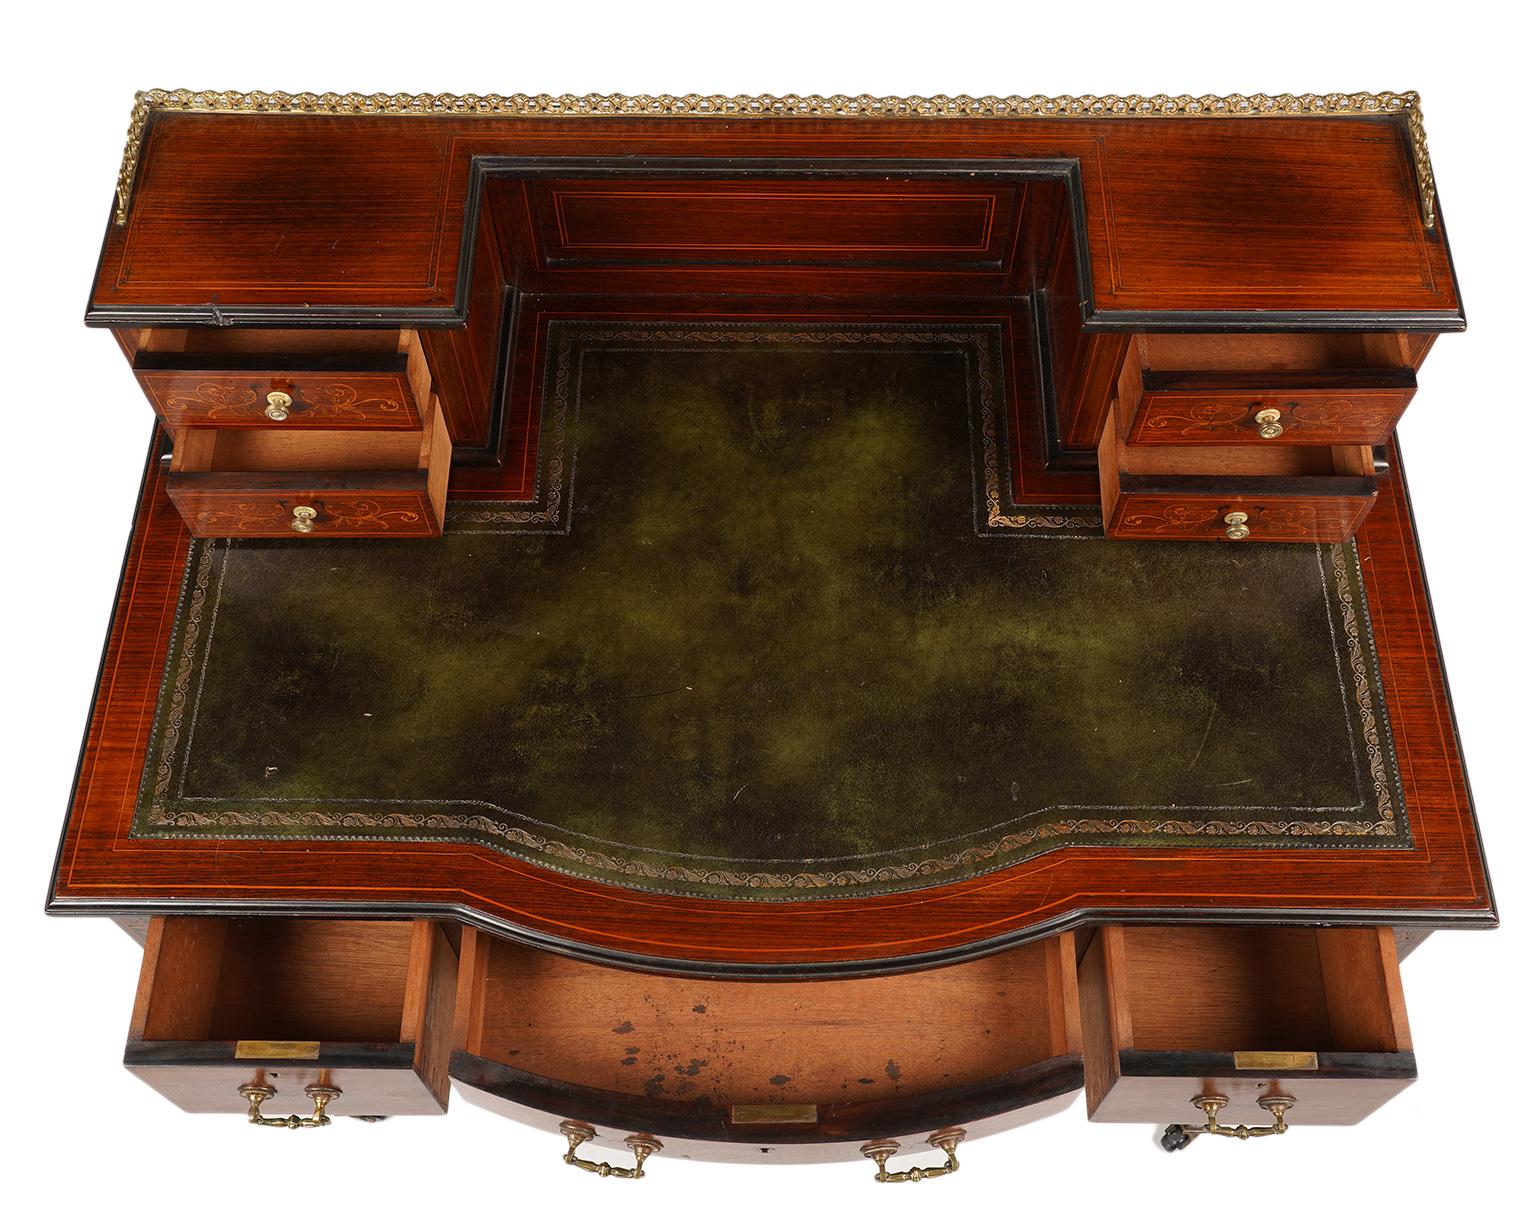 19th Century English Edwardian Inlaid Mahogany Bow Front Ladies Writing Desk with Gallery